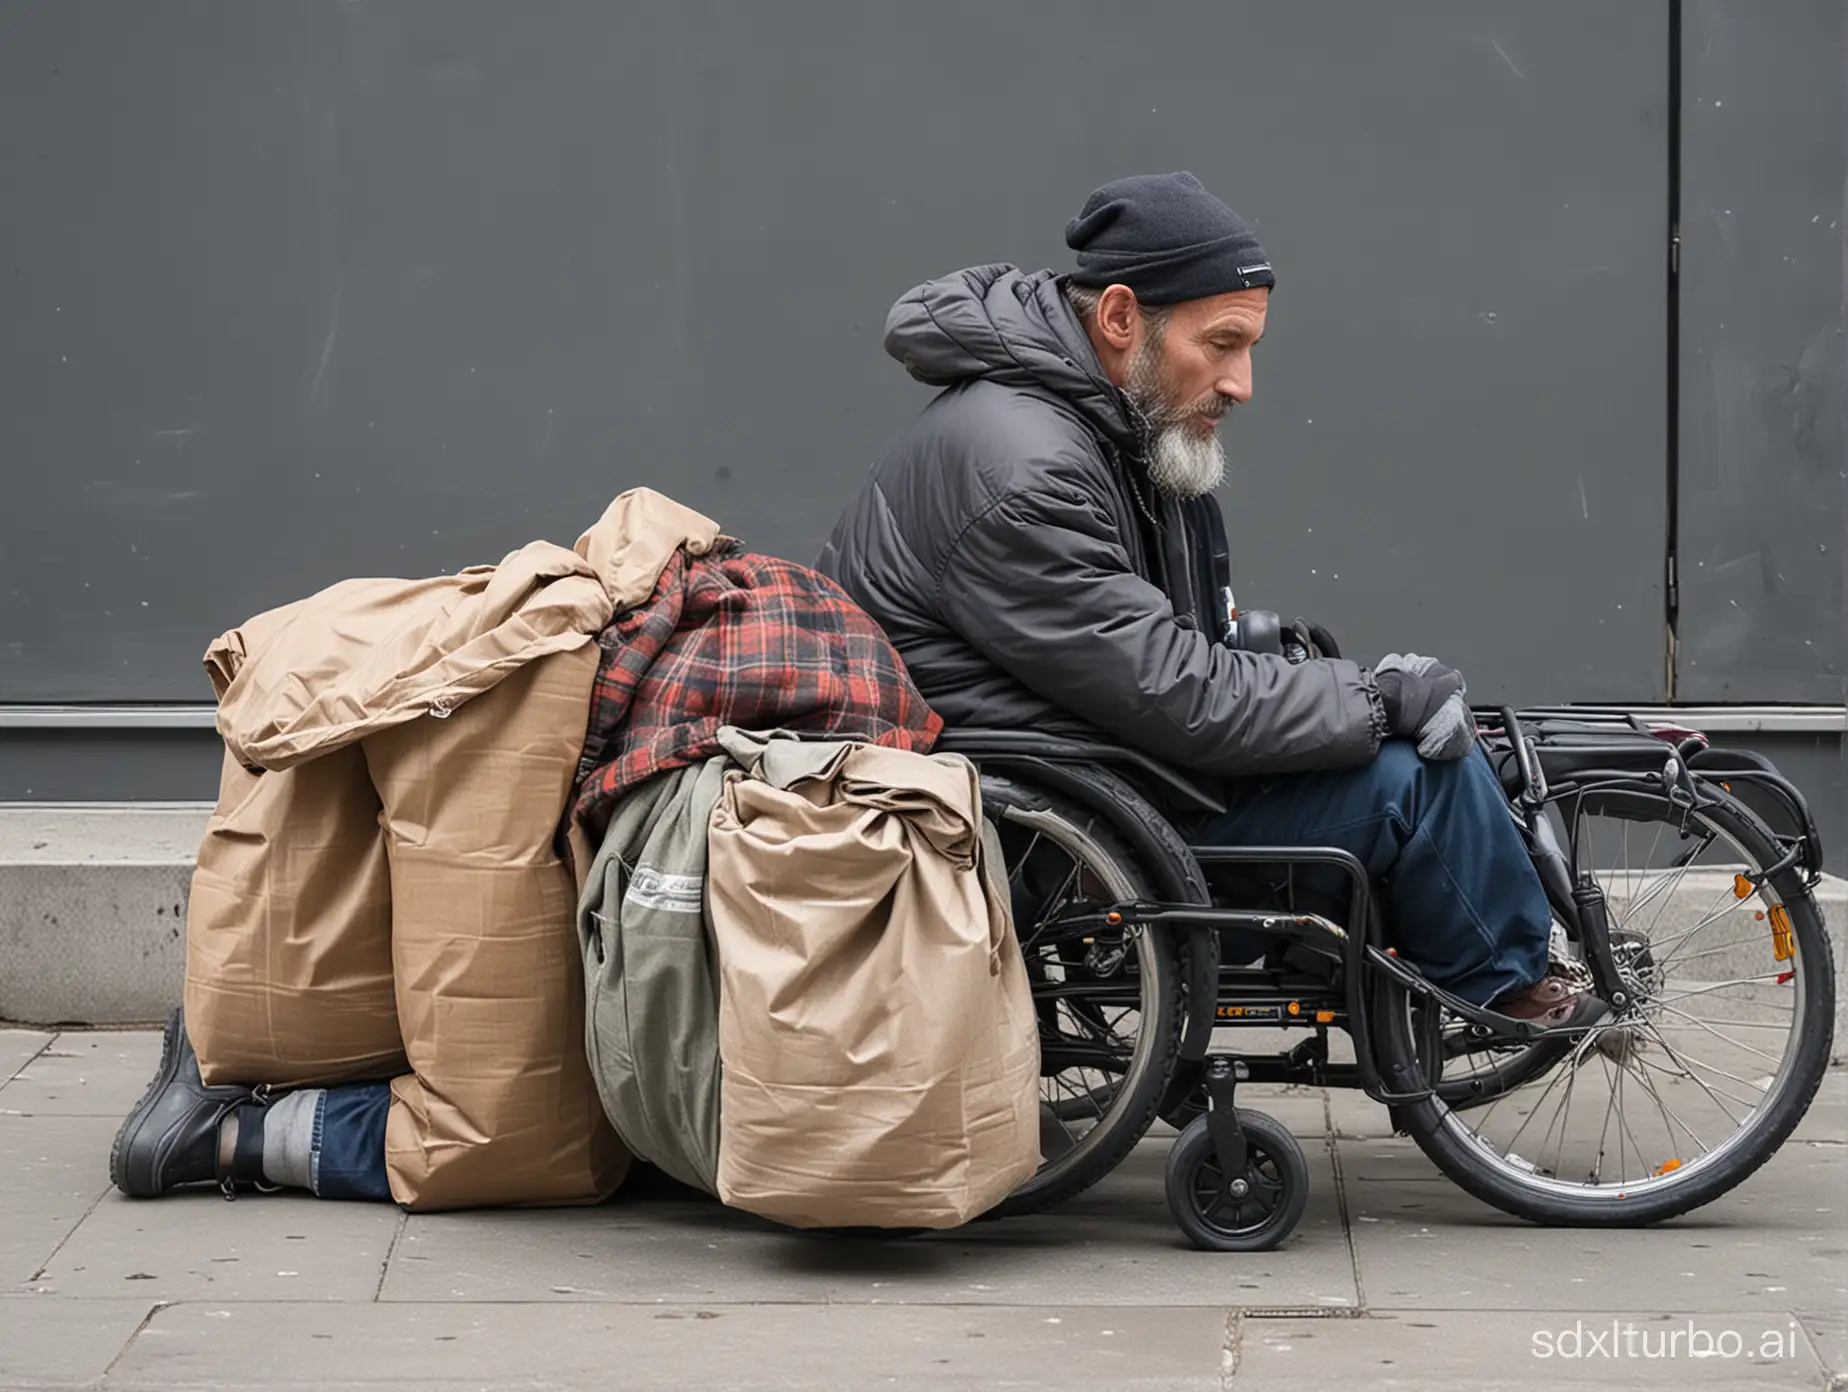 mobility option for a homeless person